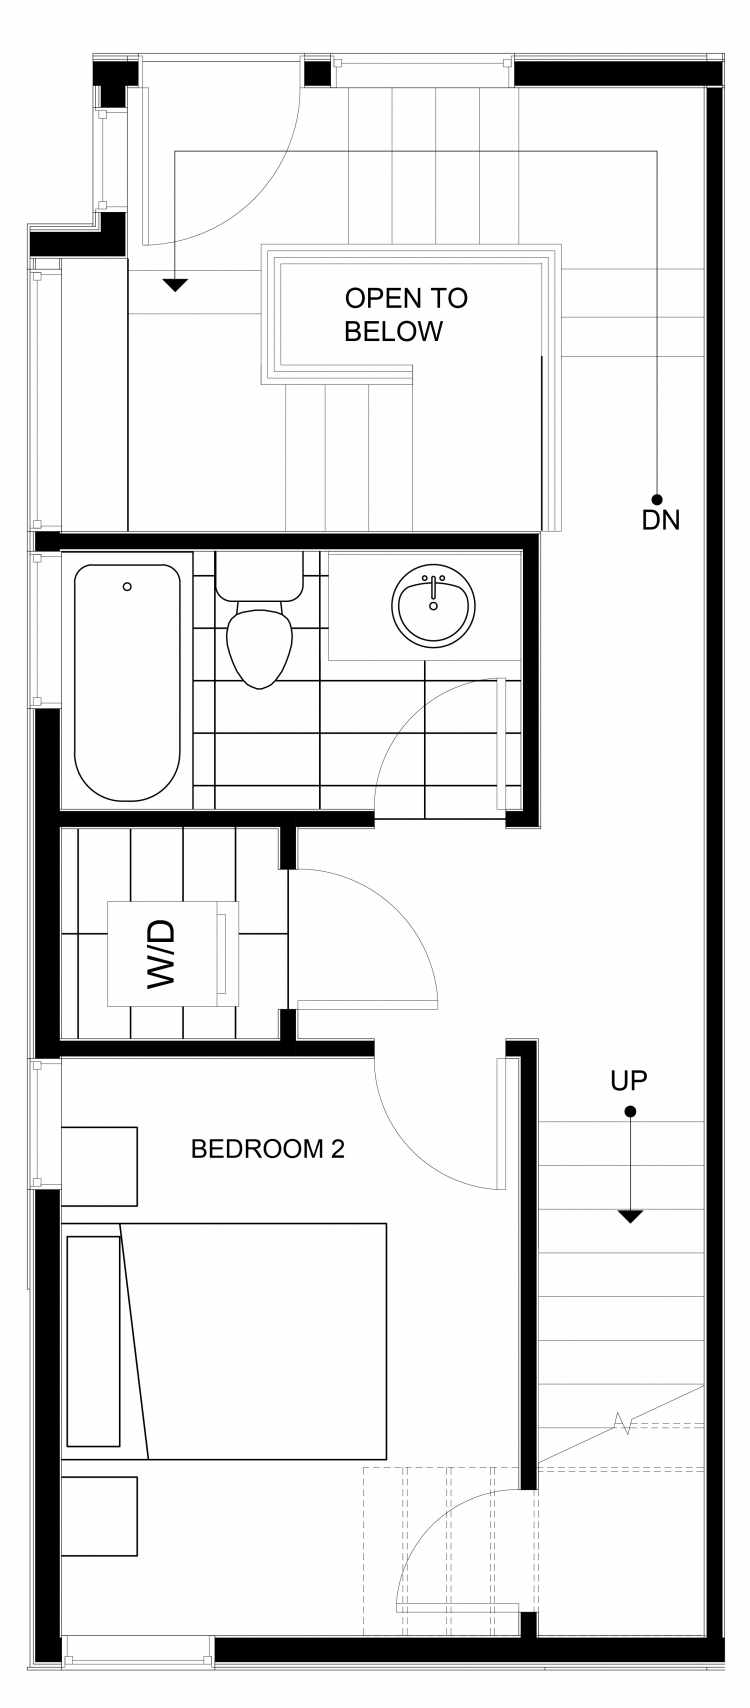 Second Floor Plan of 1543 Grandview Pl E, One of the Grandview Townhomes in Capitol Hill